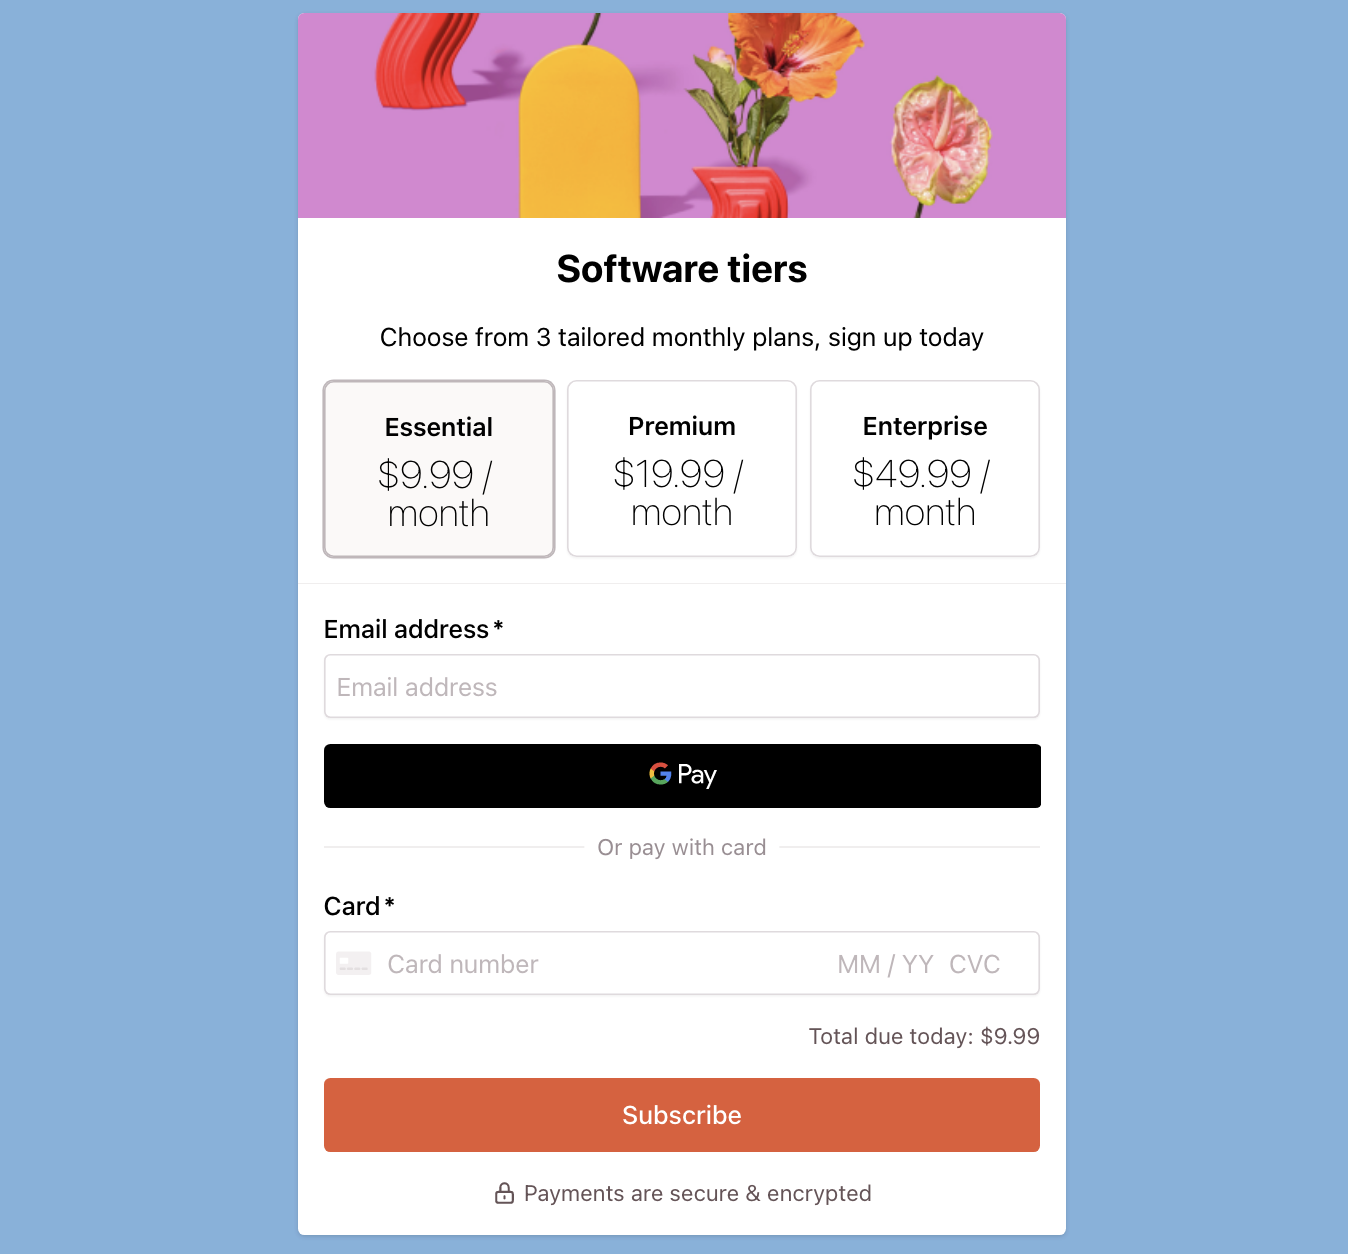 Software as a service business (SaaS) using a tiered pricing model to sell subscriptions